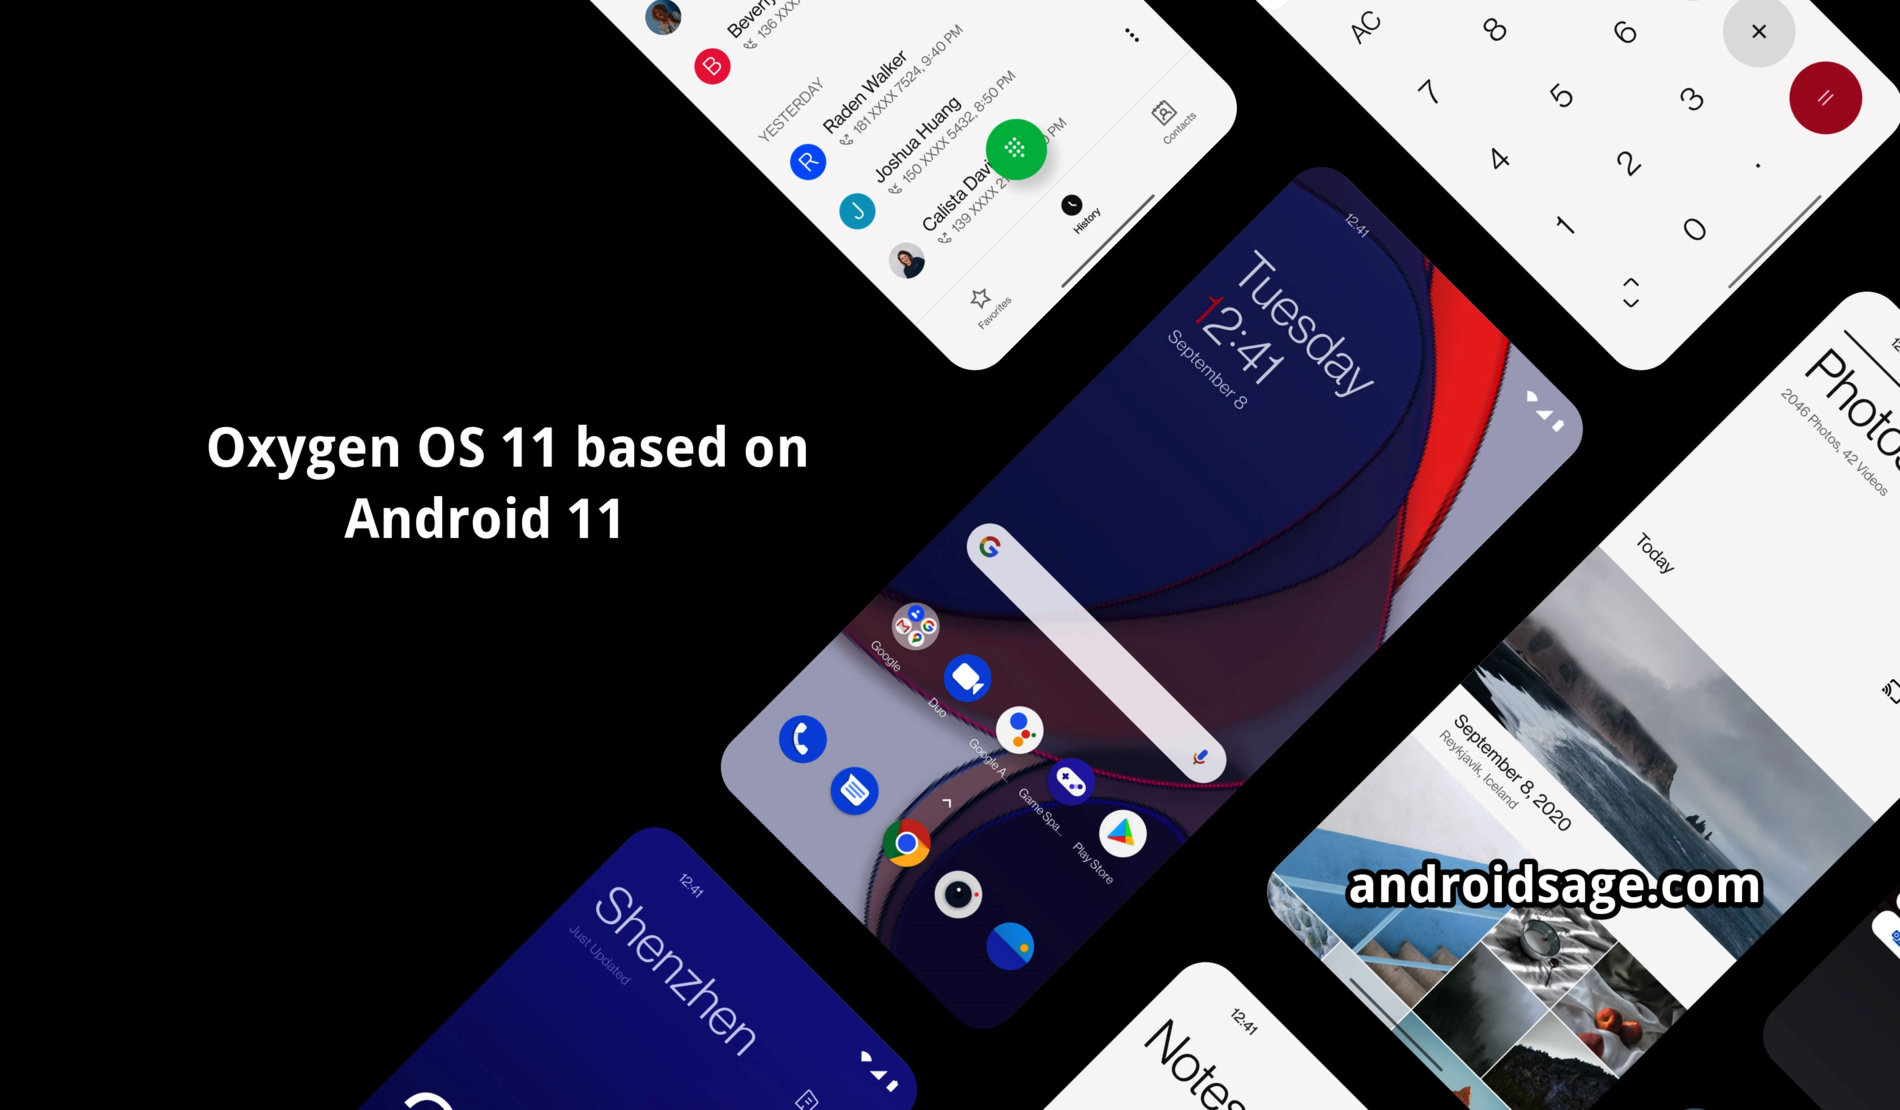 OnePlus Oxygen OS 11 based on Android 11